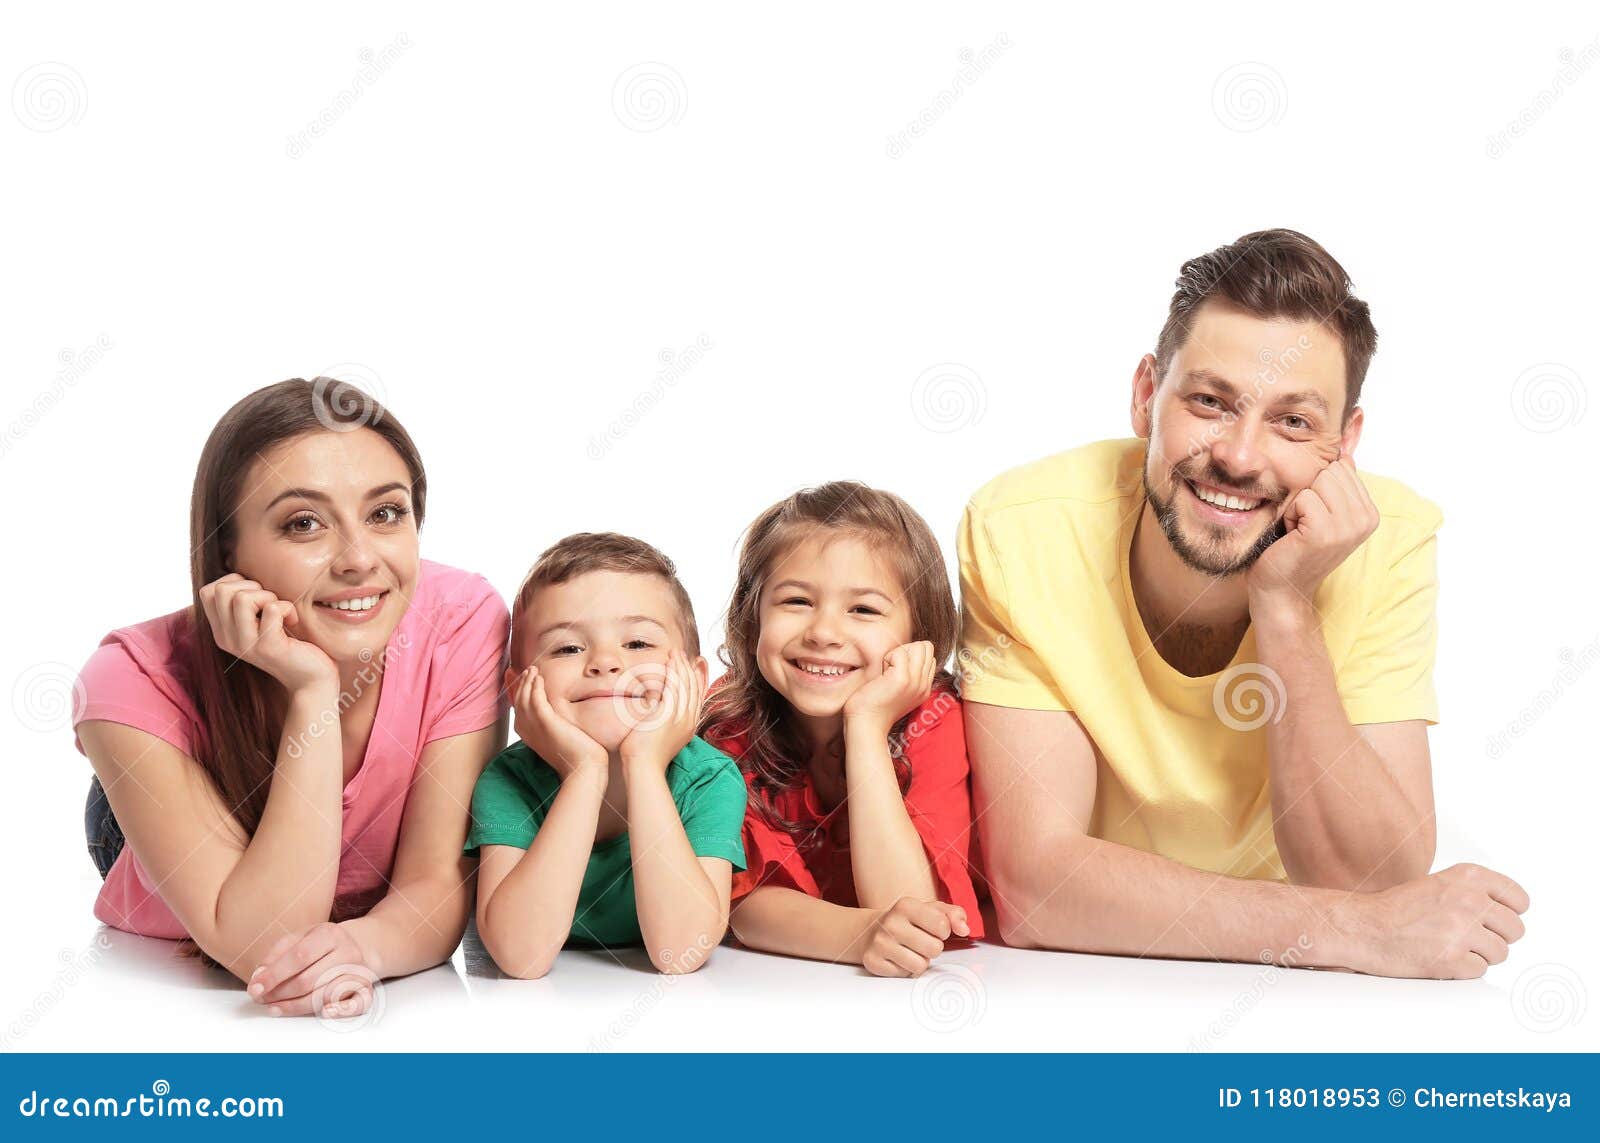 Happy Family With Children On White Background Stock Image ...